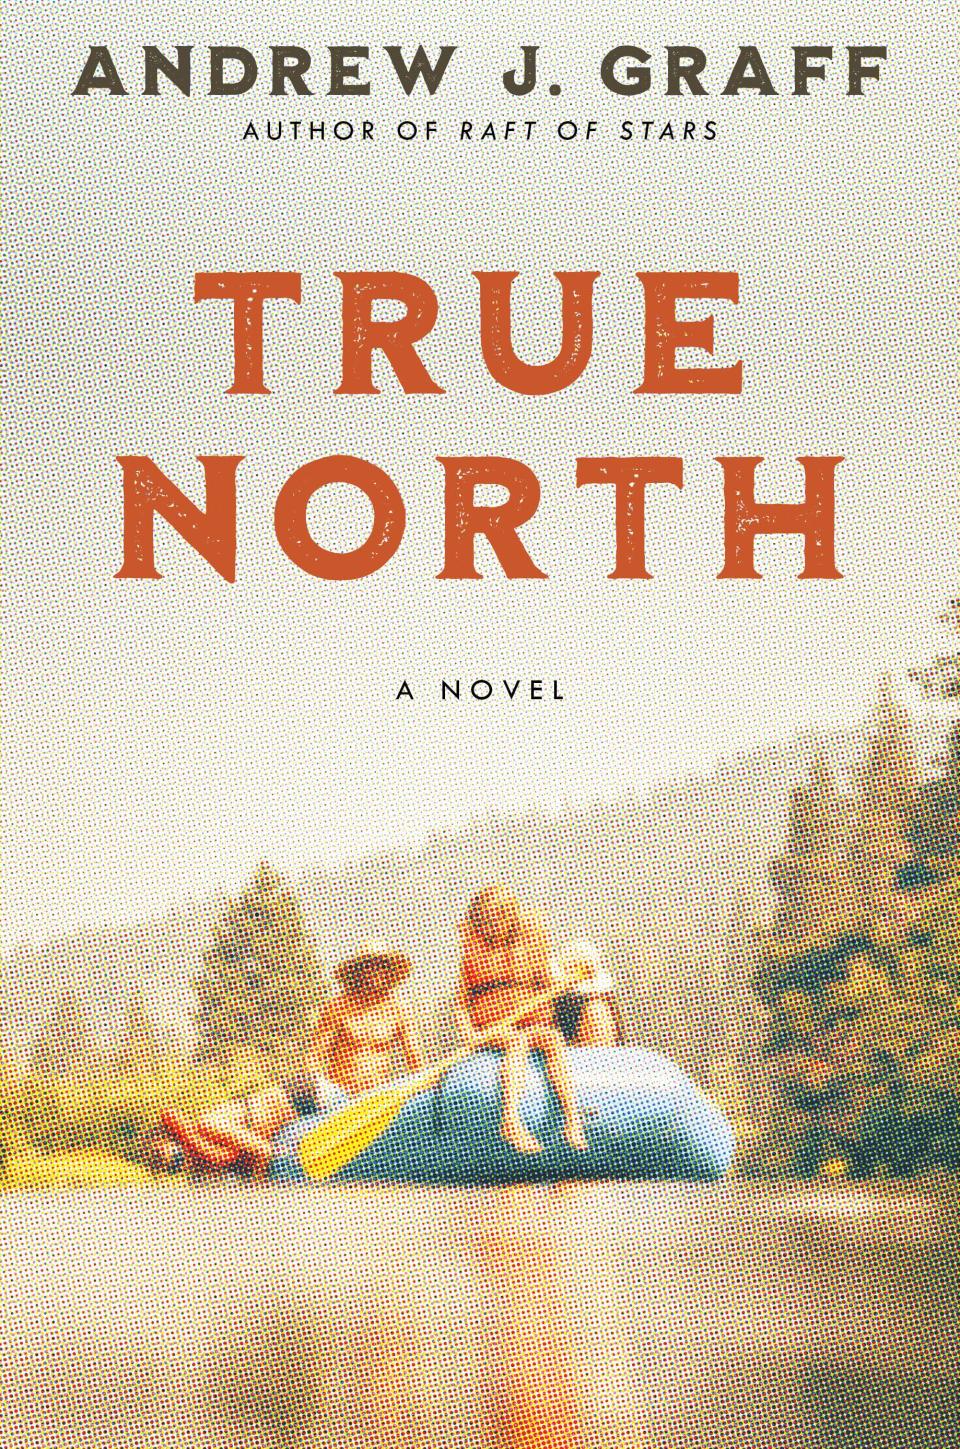 "True North" by Andrew J. Graff came out in January from Ecco-HarperCollins. It follows his critically acclaimed 2021 debut novel, "Raft of Stars."